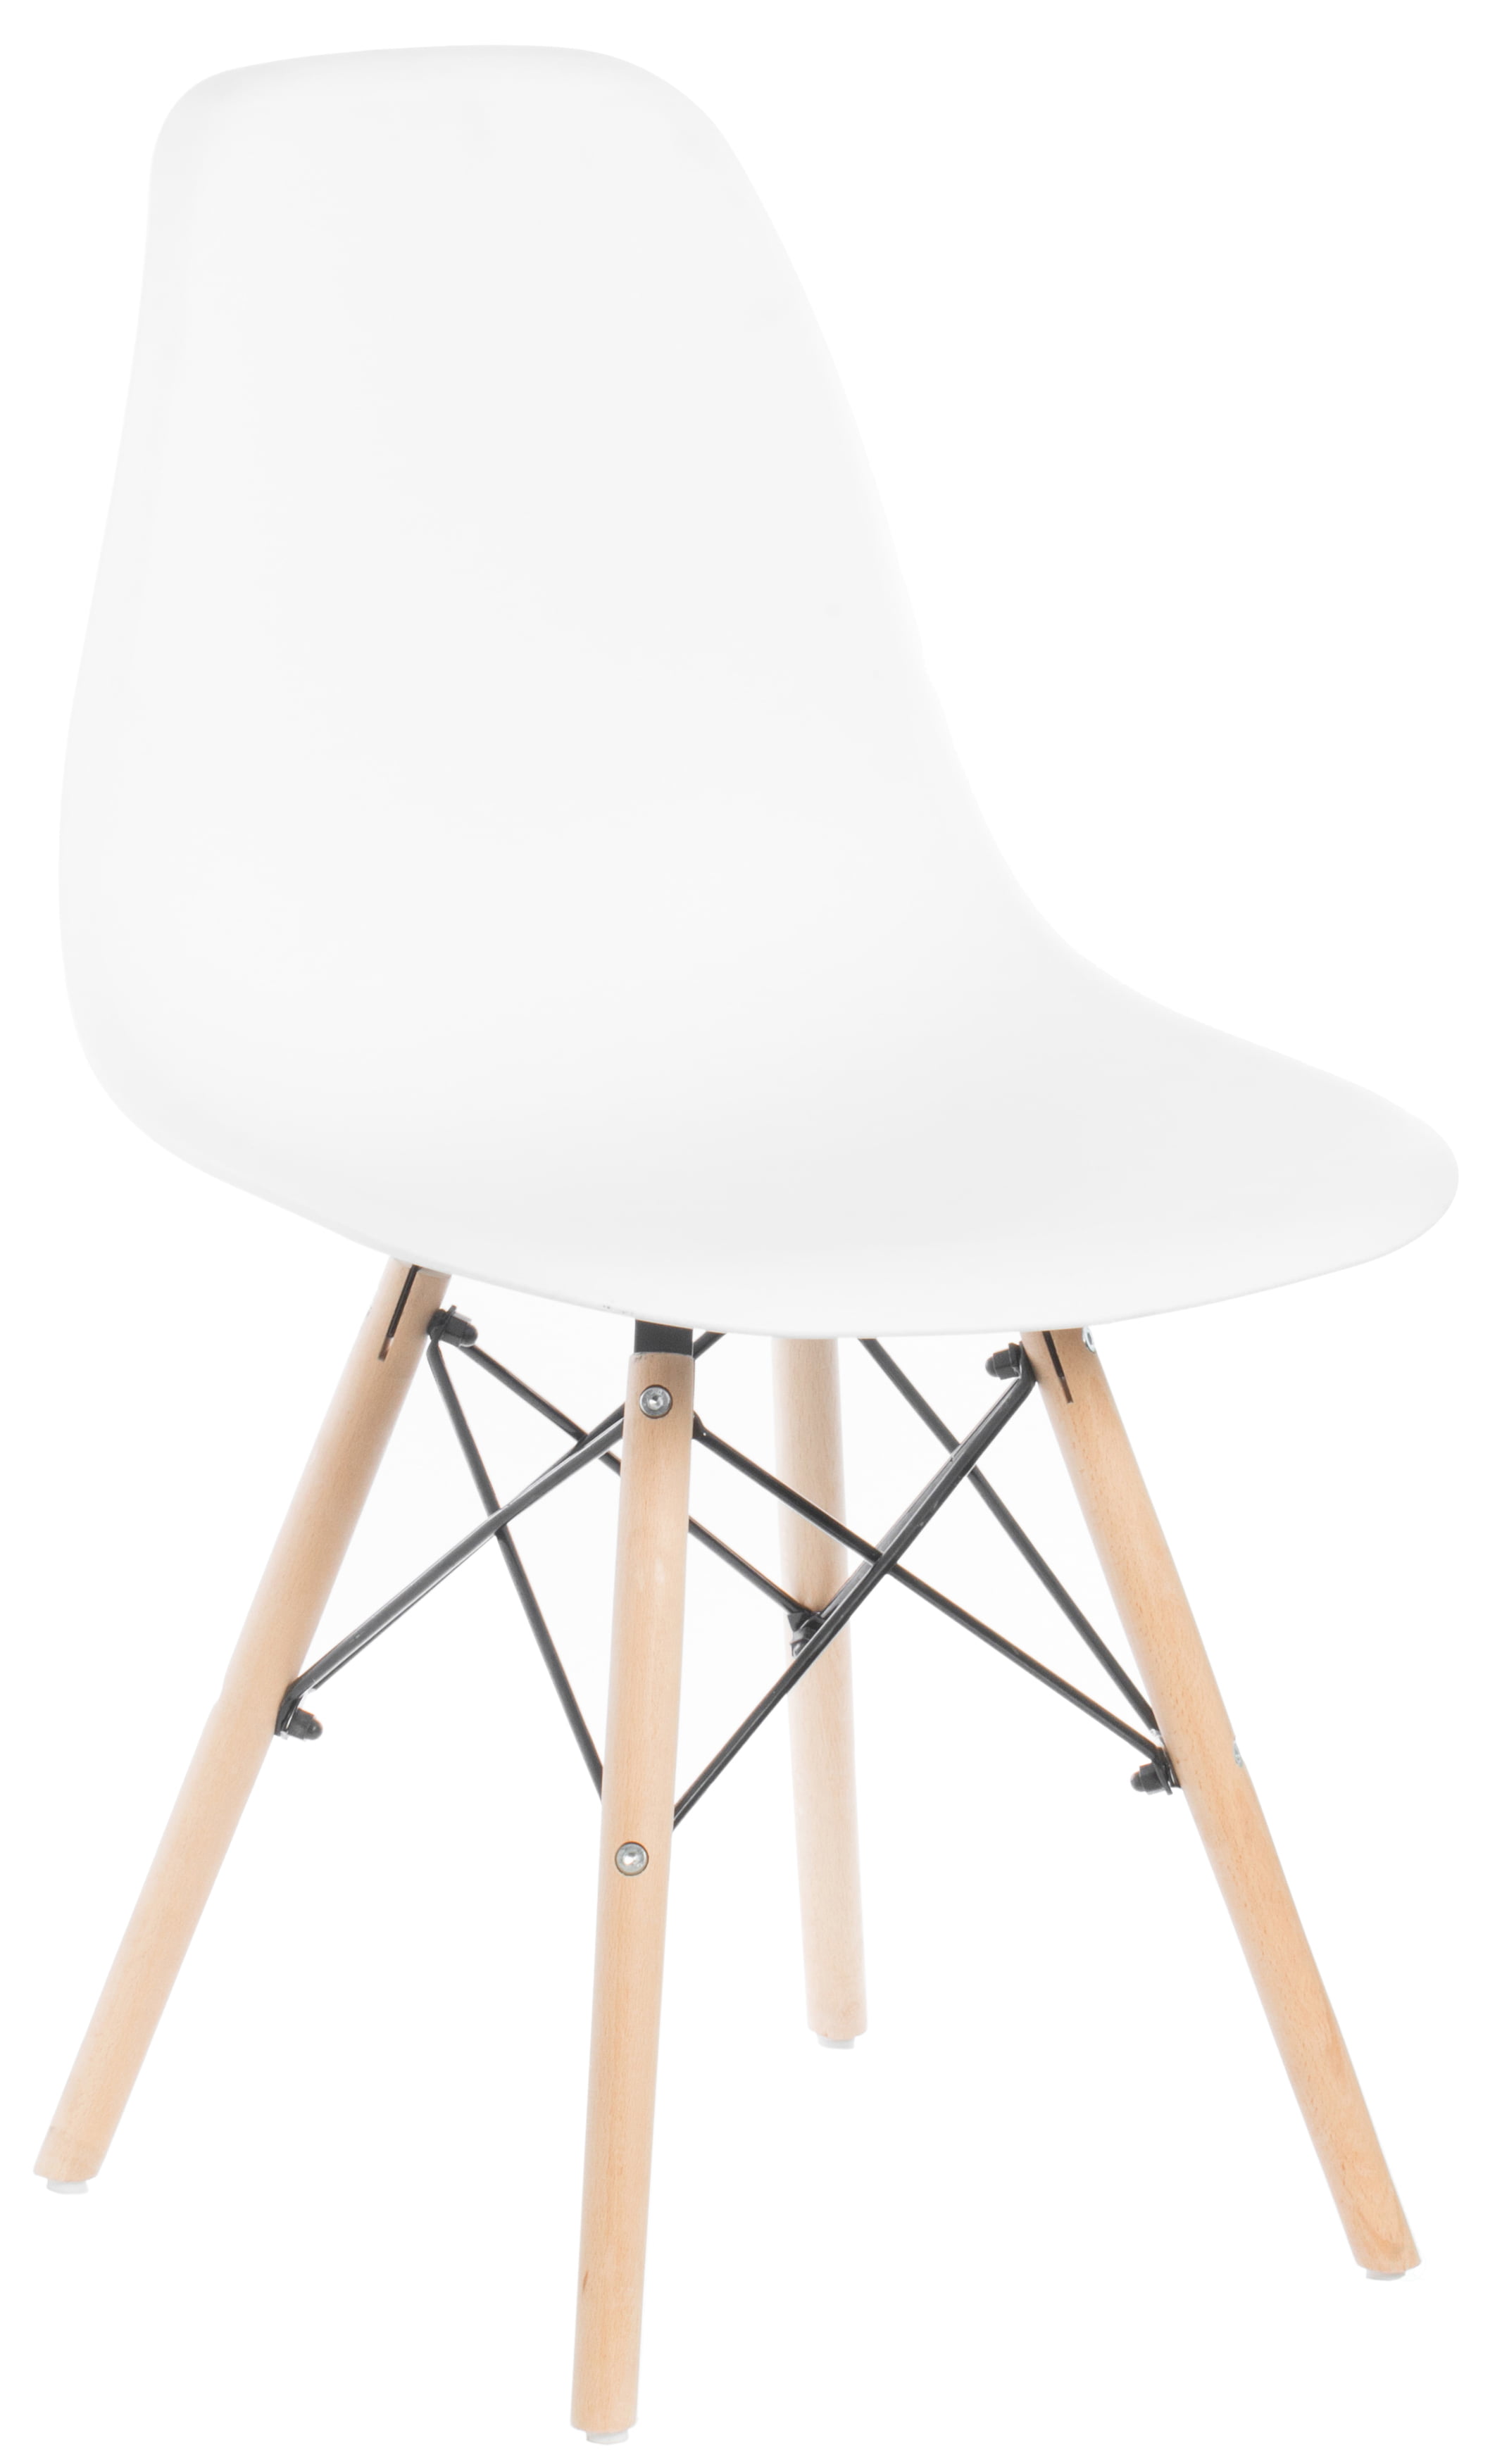 Minimalist White Chair With Wooden Legs Target for Simple Design